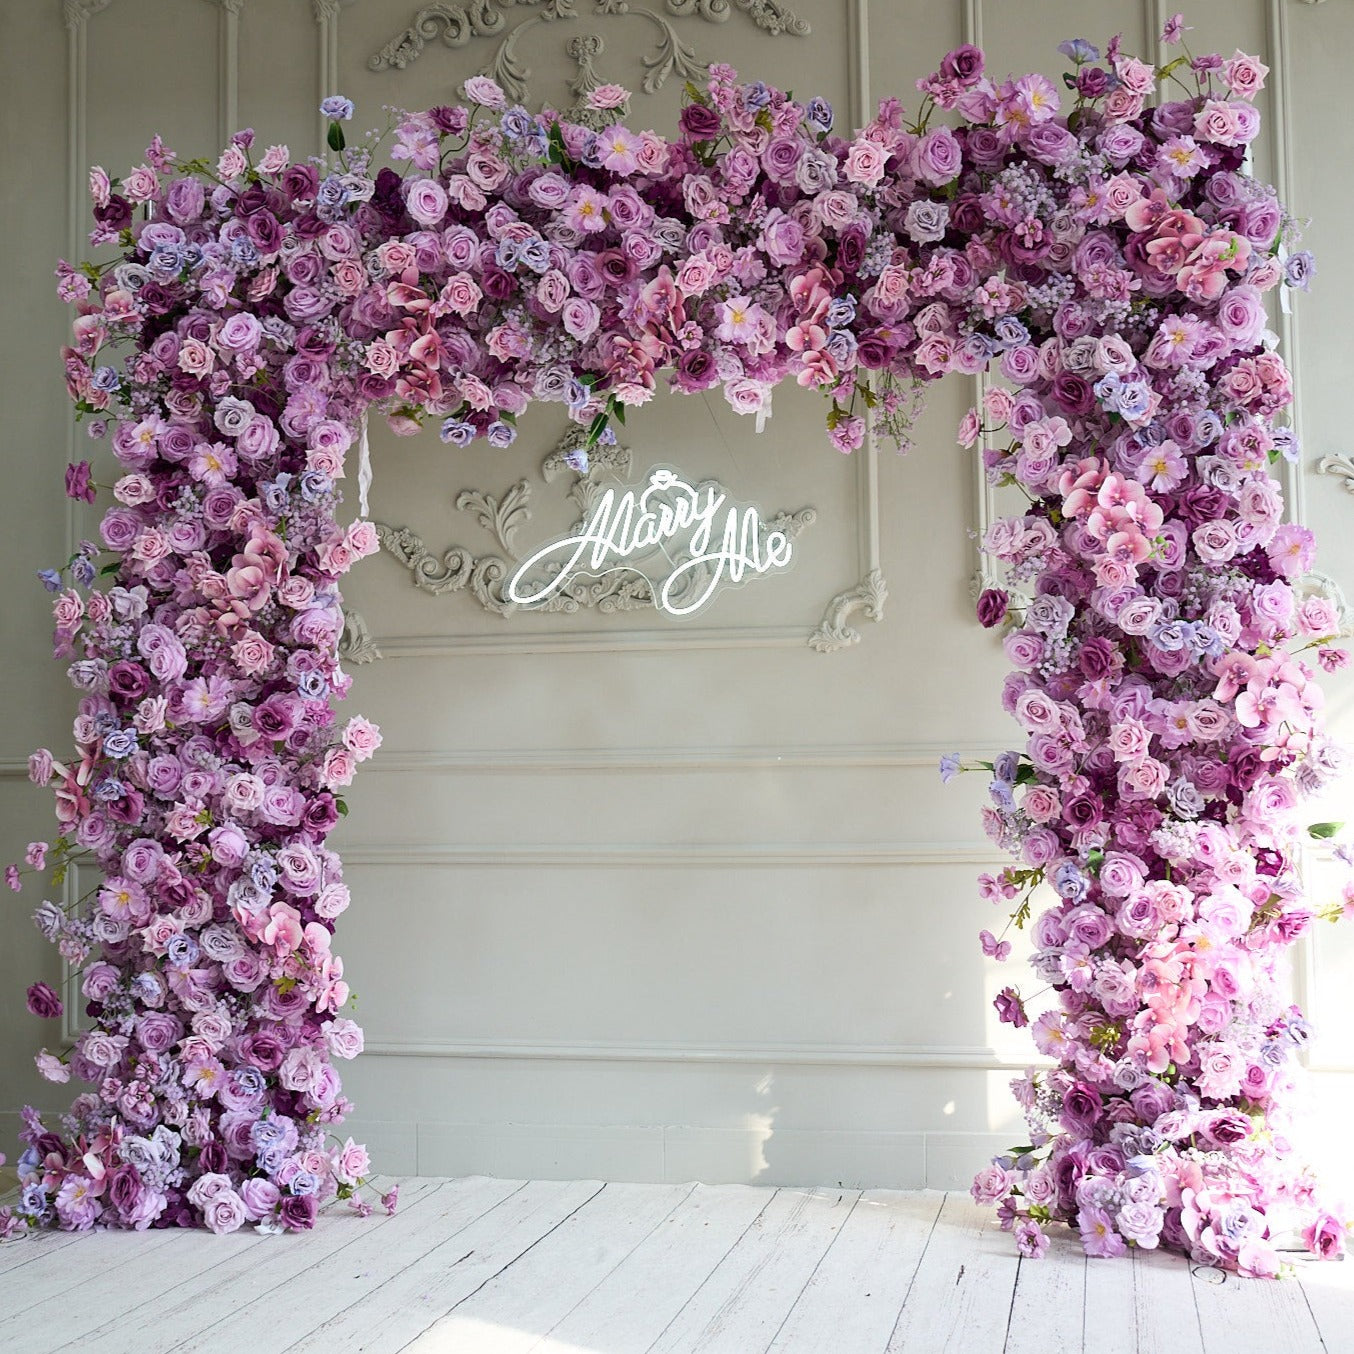 Flower Arch 8x8ft Purple Roses Florals Set Fabric Backdrop Flower Wall Proposal Wedding Party Decor